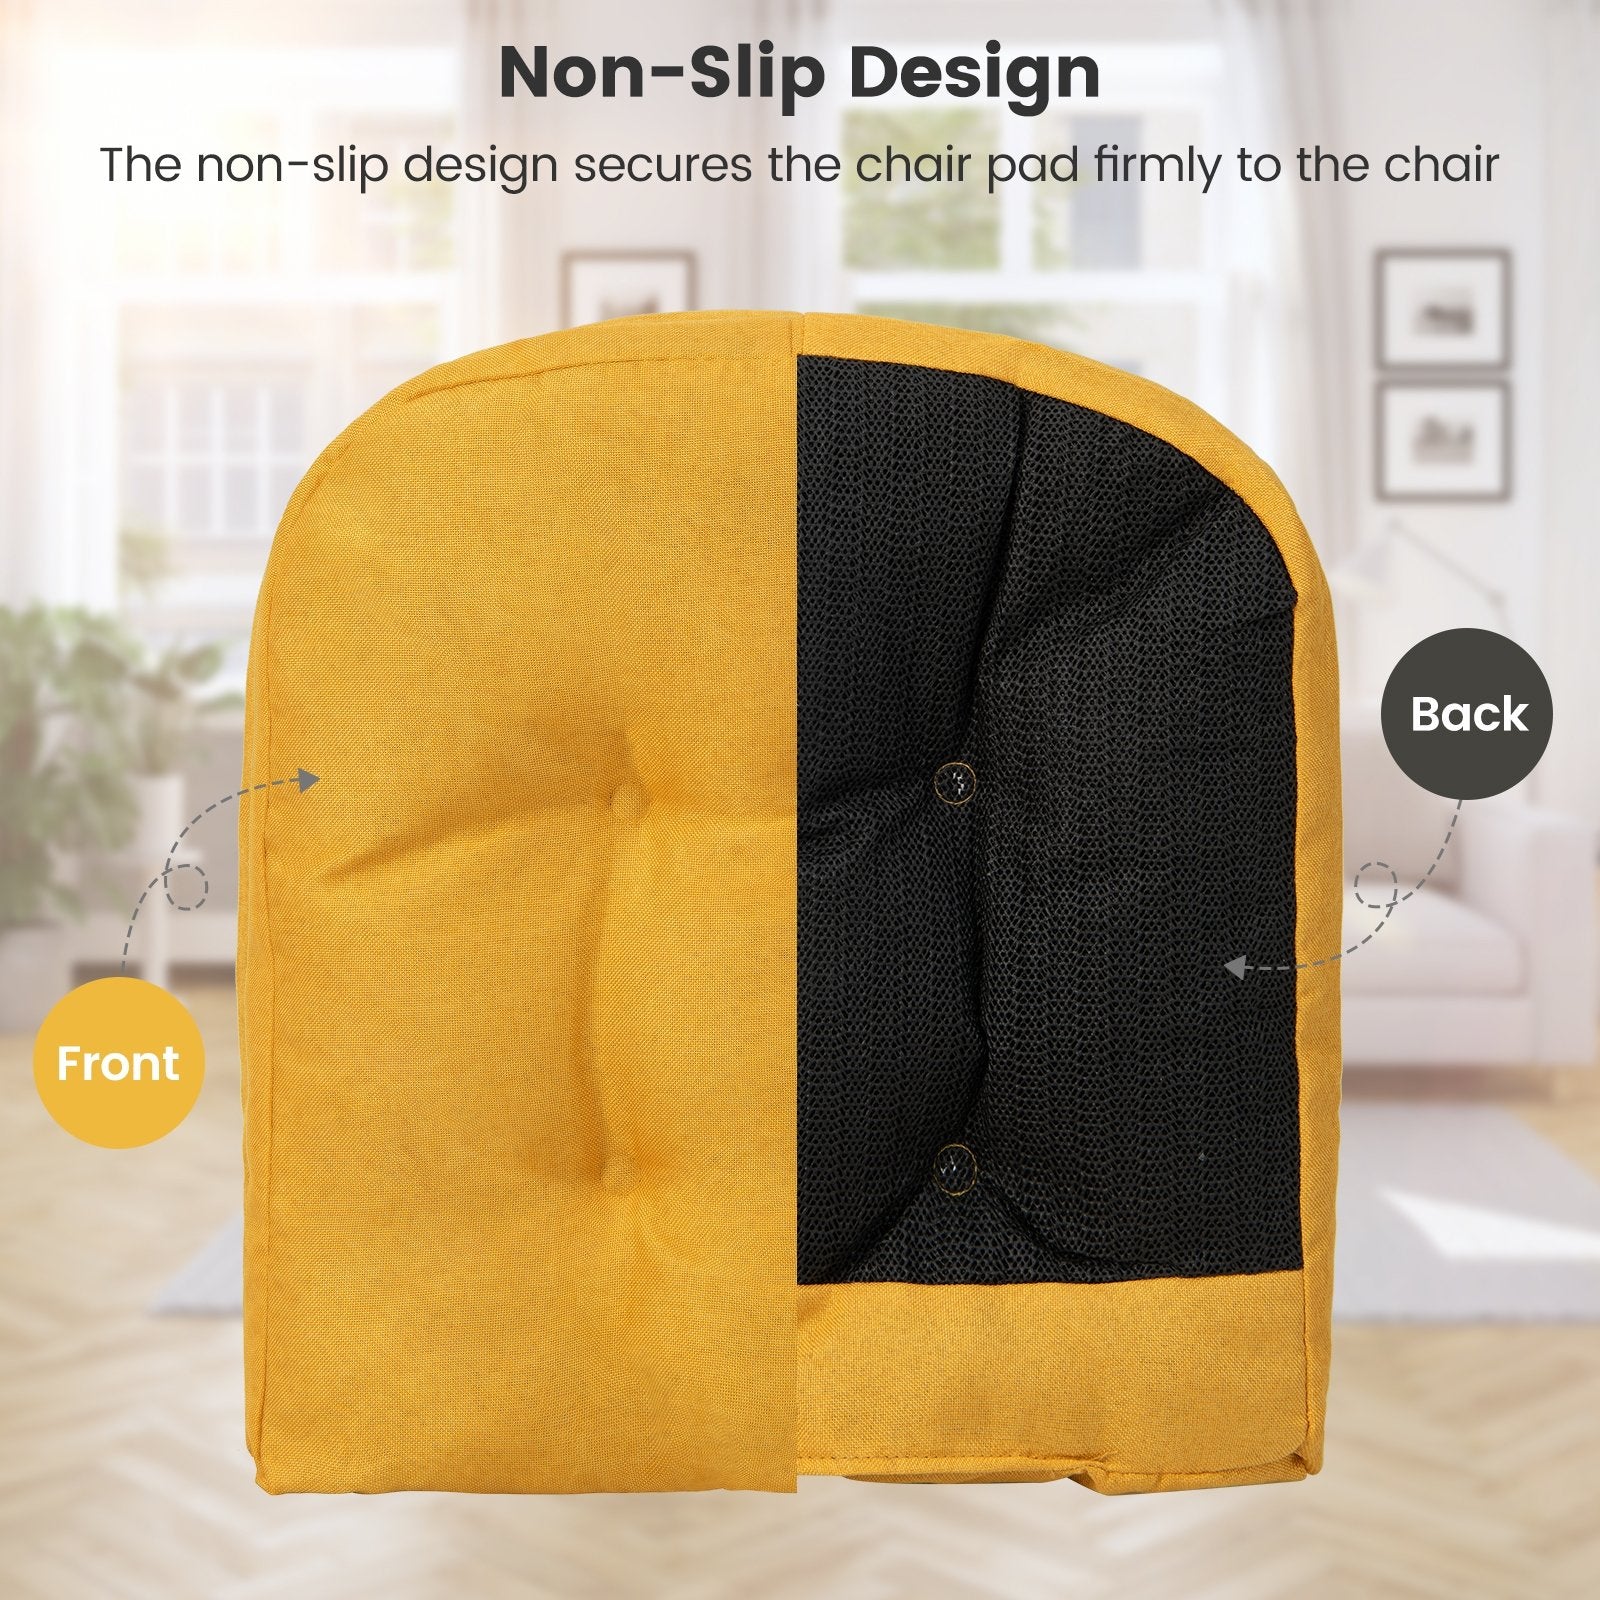 4 Pack 17.5 x 17 Inch U-Shaped Chair Pads with Polyester Cover, Yellow - Gallery Canada